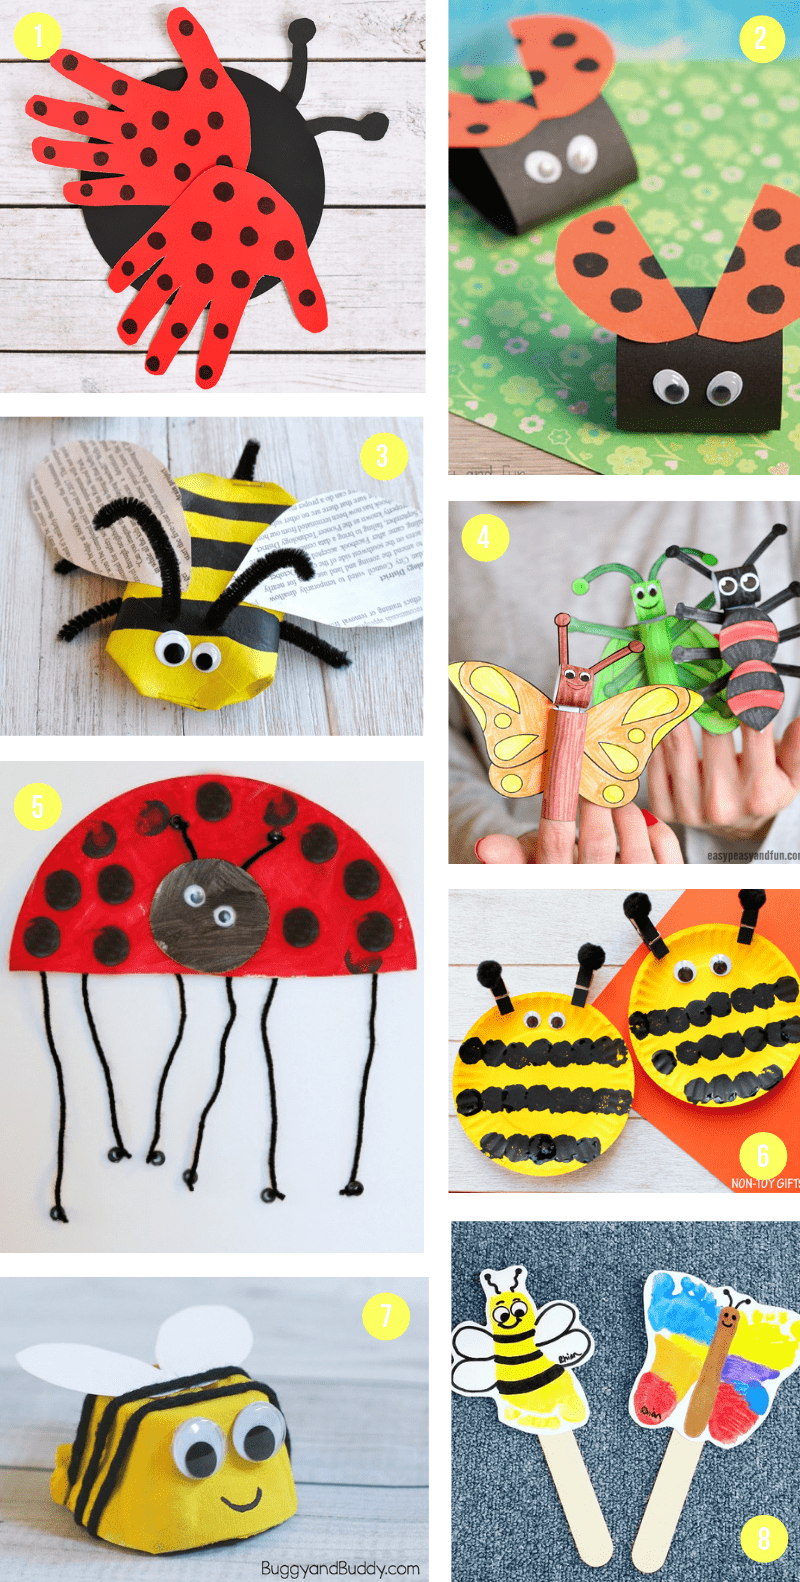 Fun and Creative Spring Art for Kids - Projects with Kids